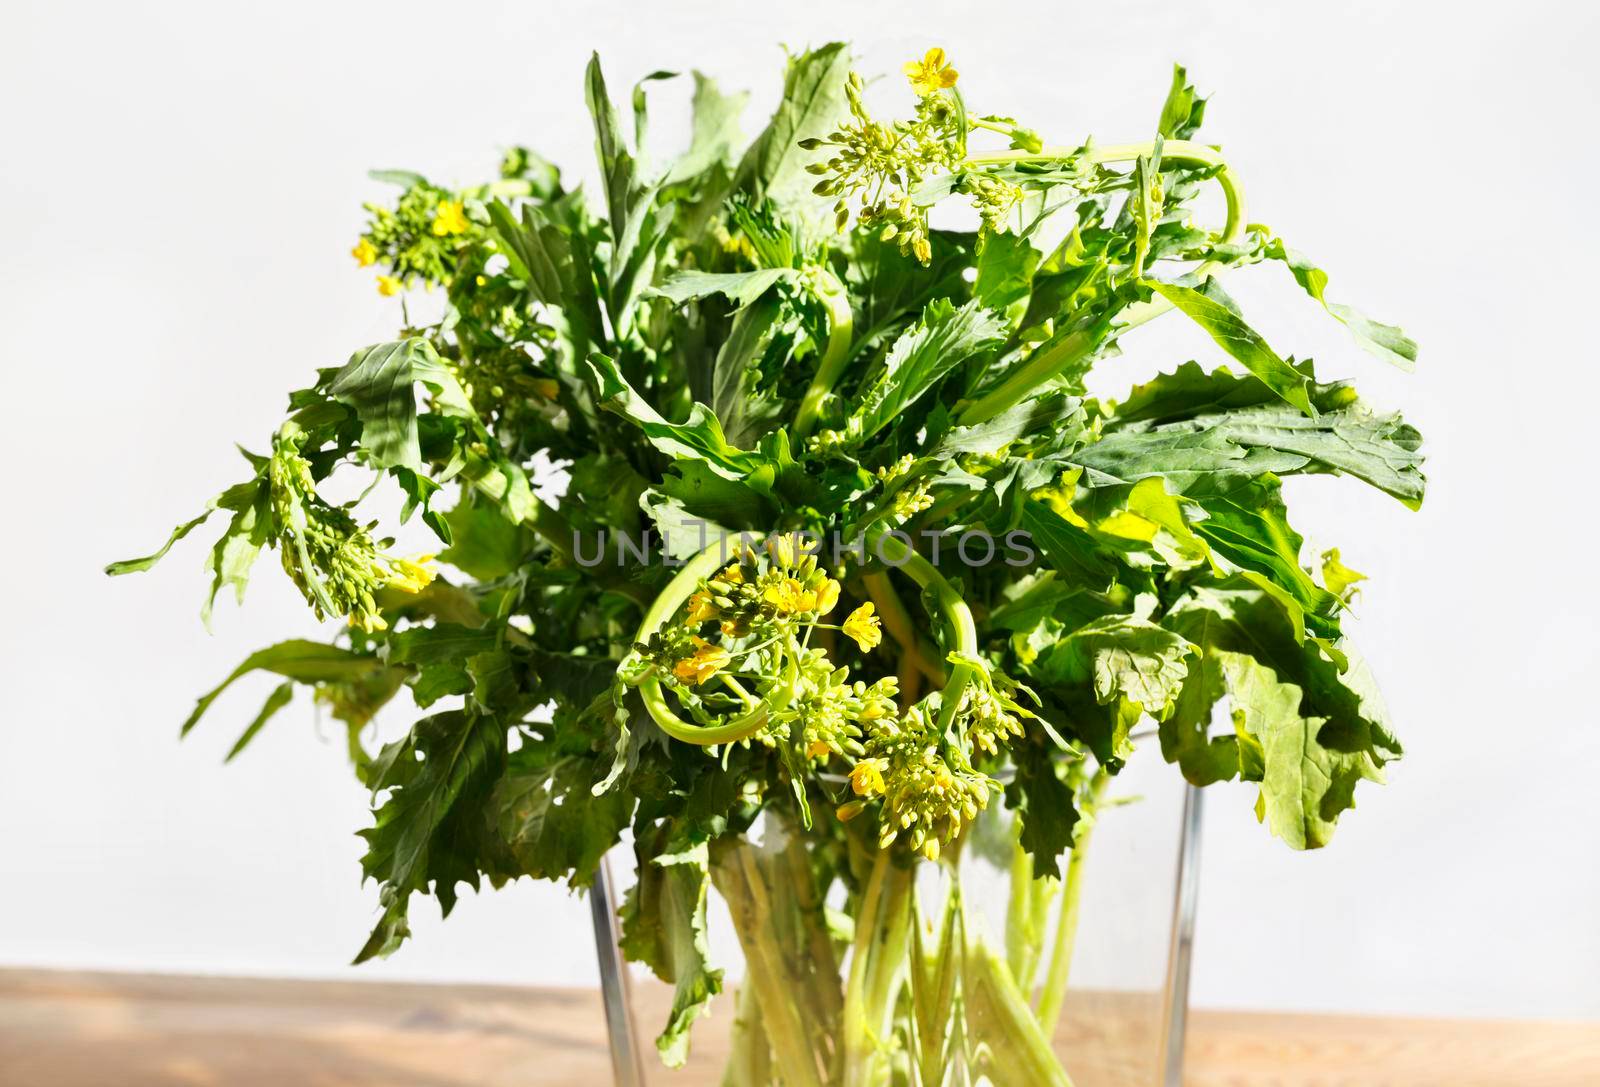 Bunch of turnip greens -brassica rapa - with yellow flowers in pot, root vegetable with bitter taste